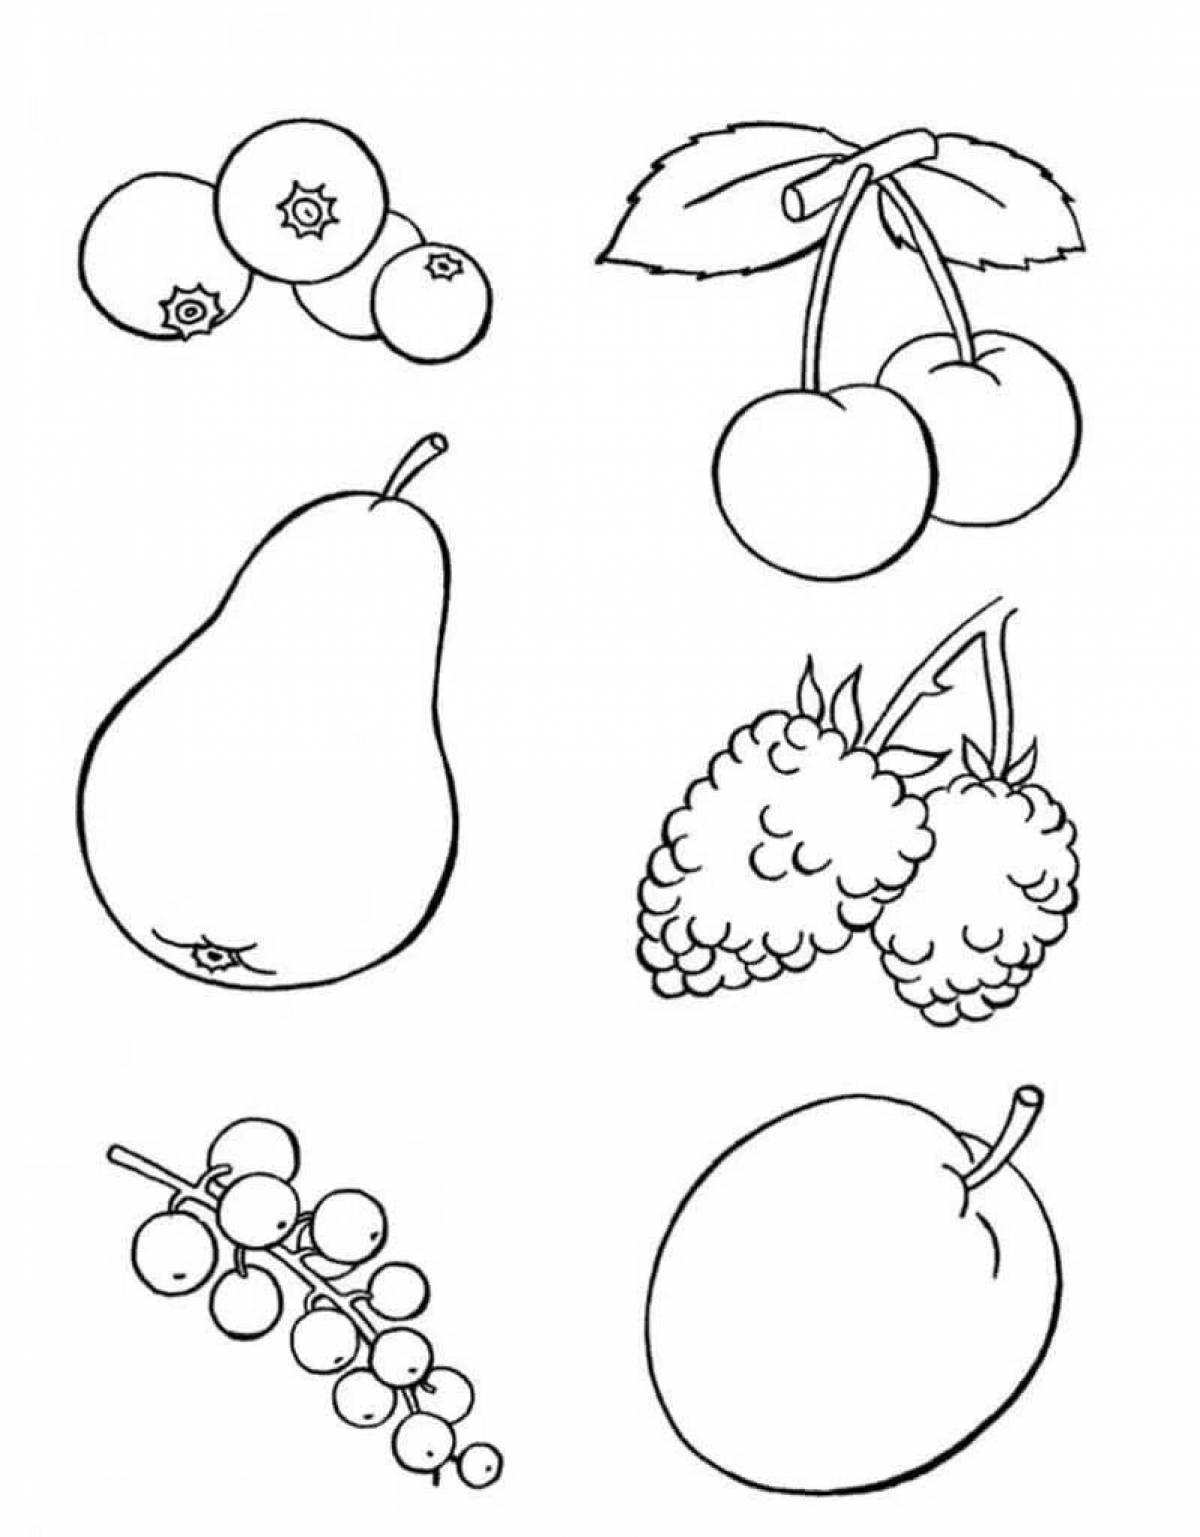 Coloring book fruits and vegetables